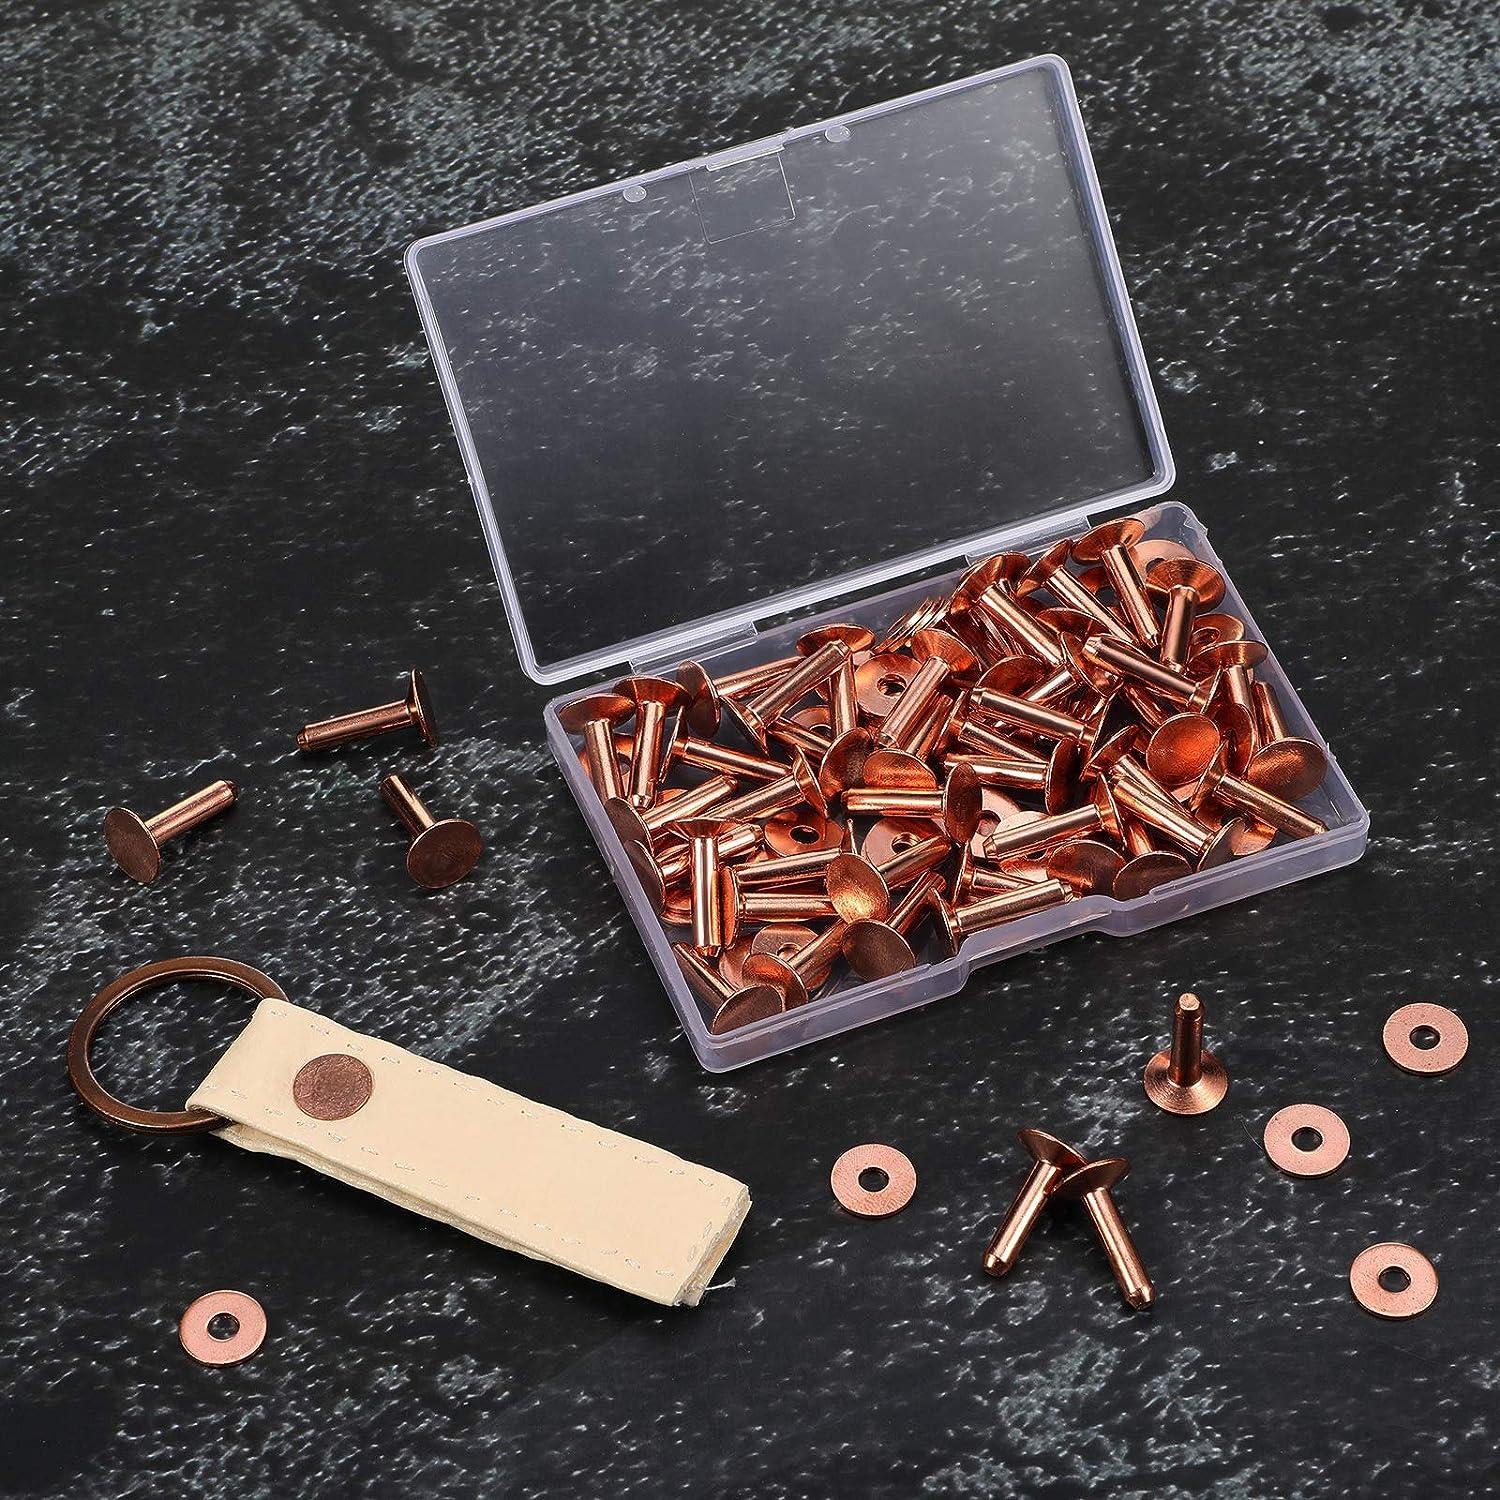 100 Sets Copper Rivets and Burrs Washers Leather Copper Rivet Fastener for  Belts Wallets Collars Leather DIY Craft Supplies (9/16 Inch Size 12)